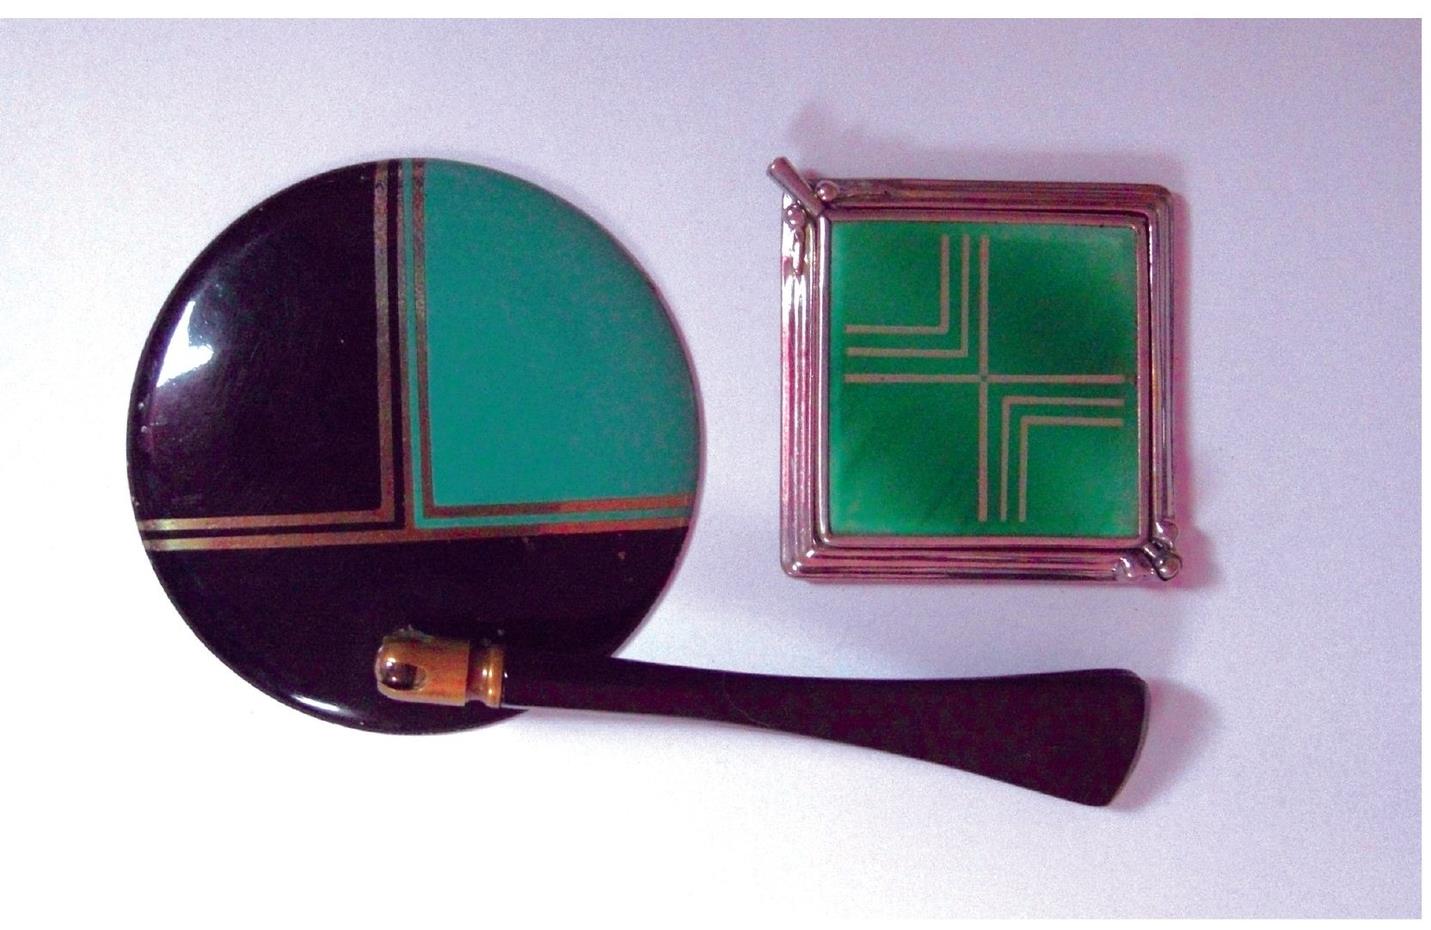 Art deco compact and mirror 1930s Mascot lipstick and pill box mint and - photo 7